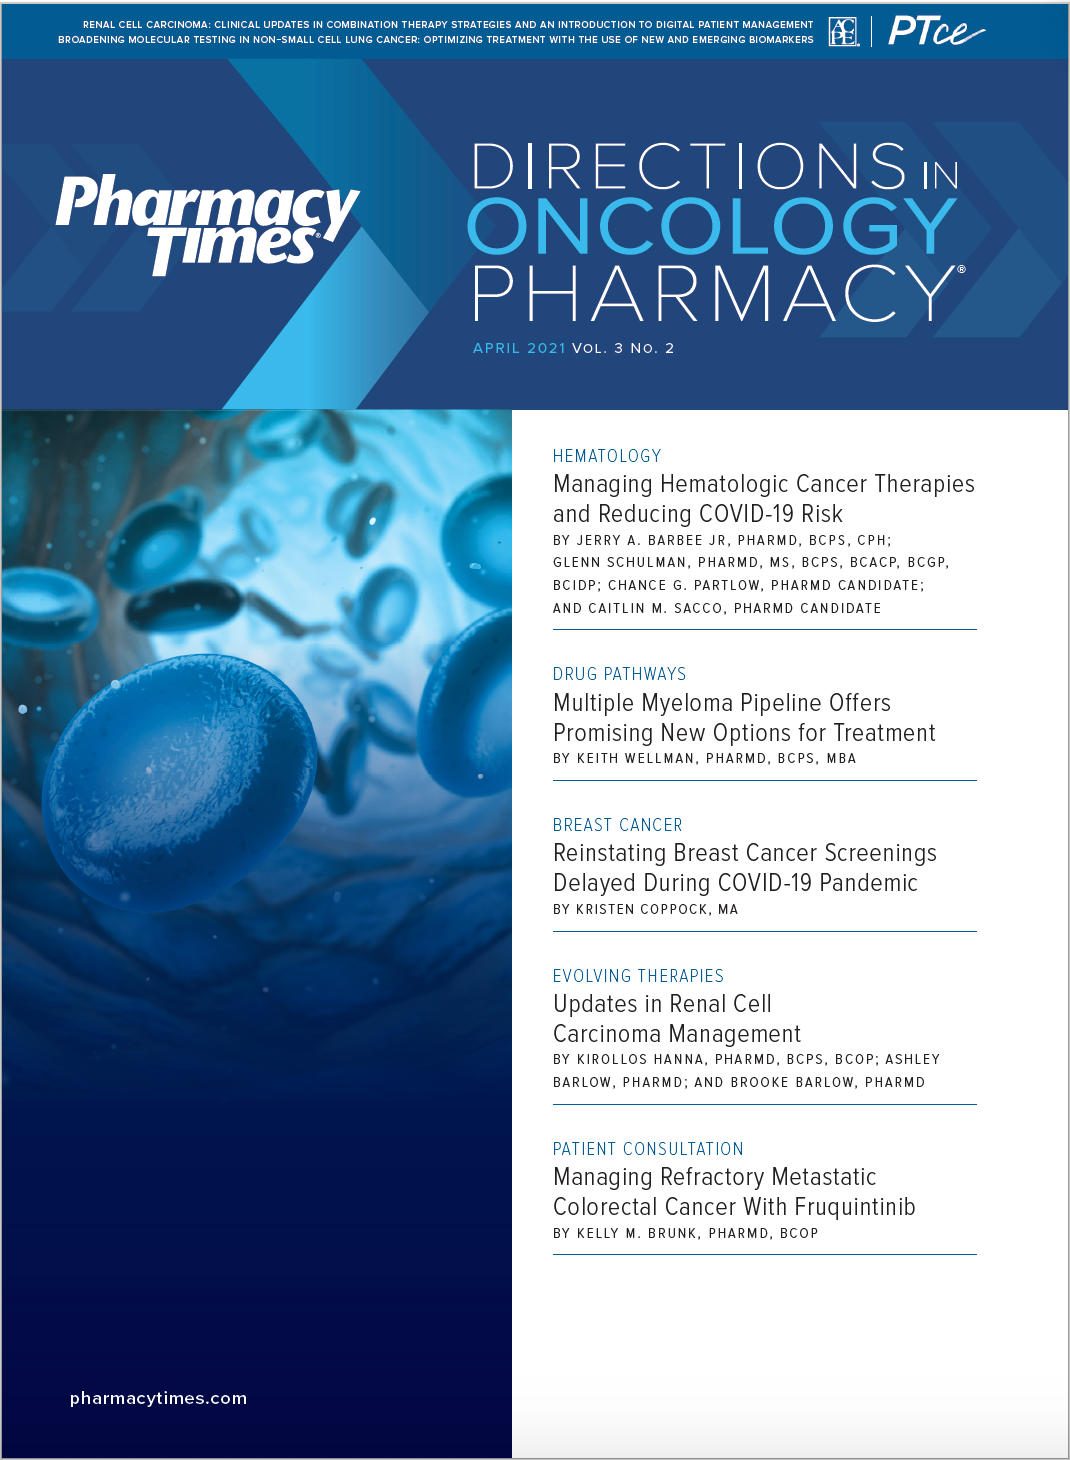 Directions in Oncology Pharmacy